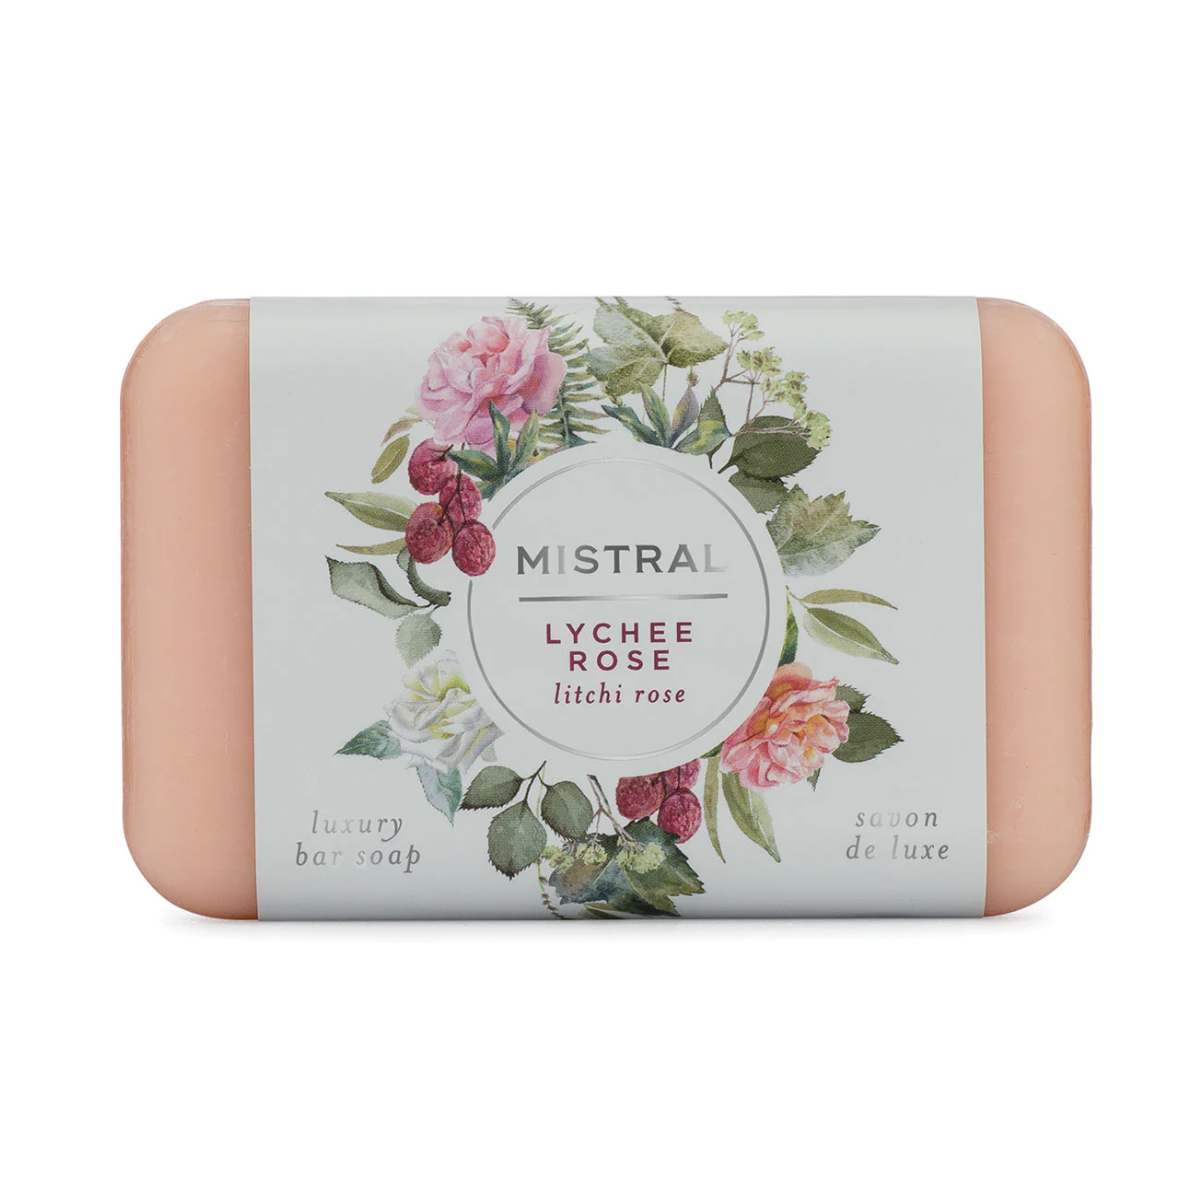 LYCHEE ROSE CLASSIC BAR SOAP by MISTRAL